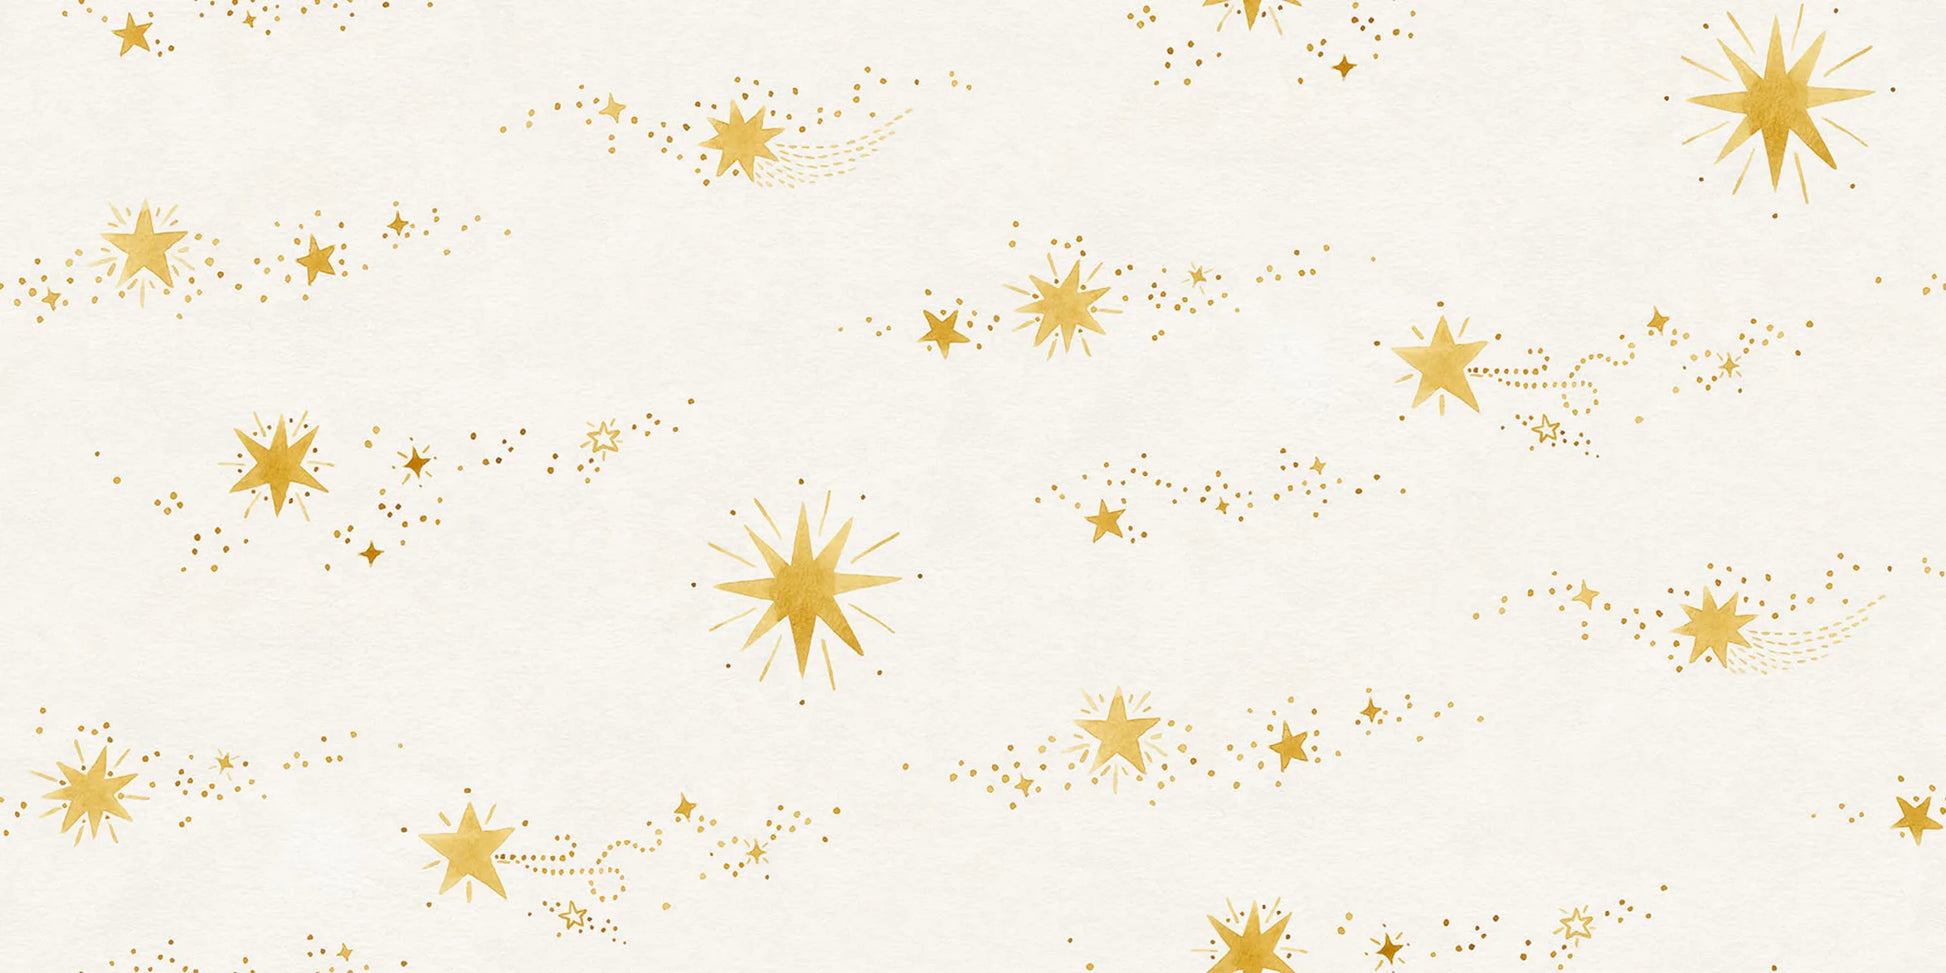 The beautiful hand-painted stars dance over the wallpaper like stars in the sky, created together with Johanna Bradford